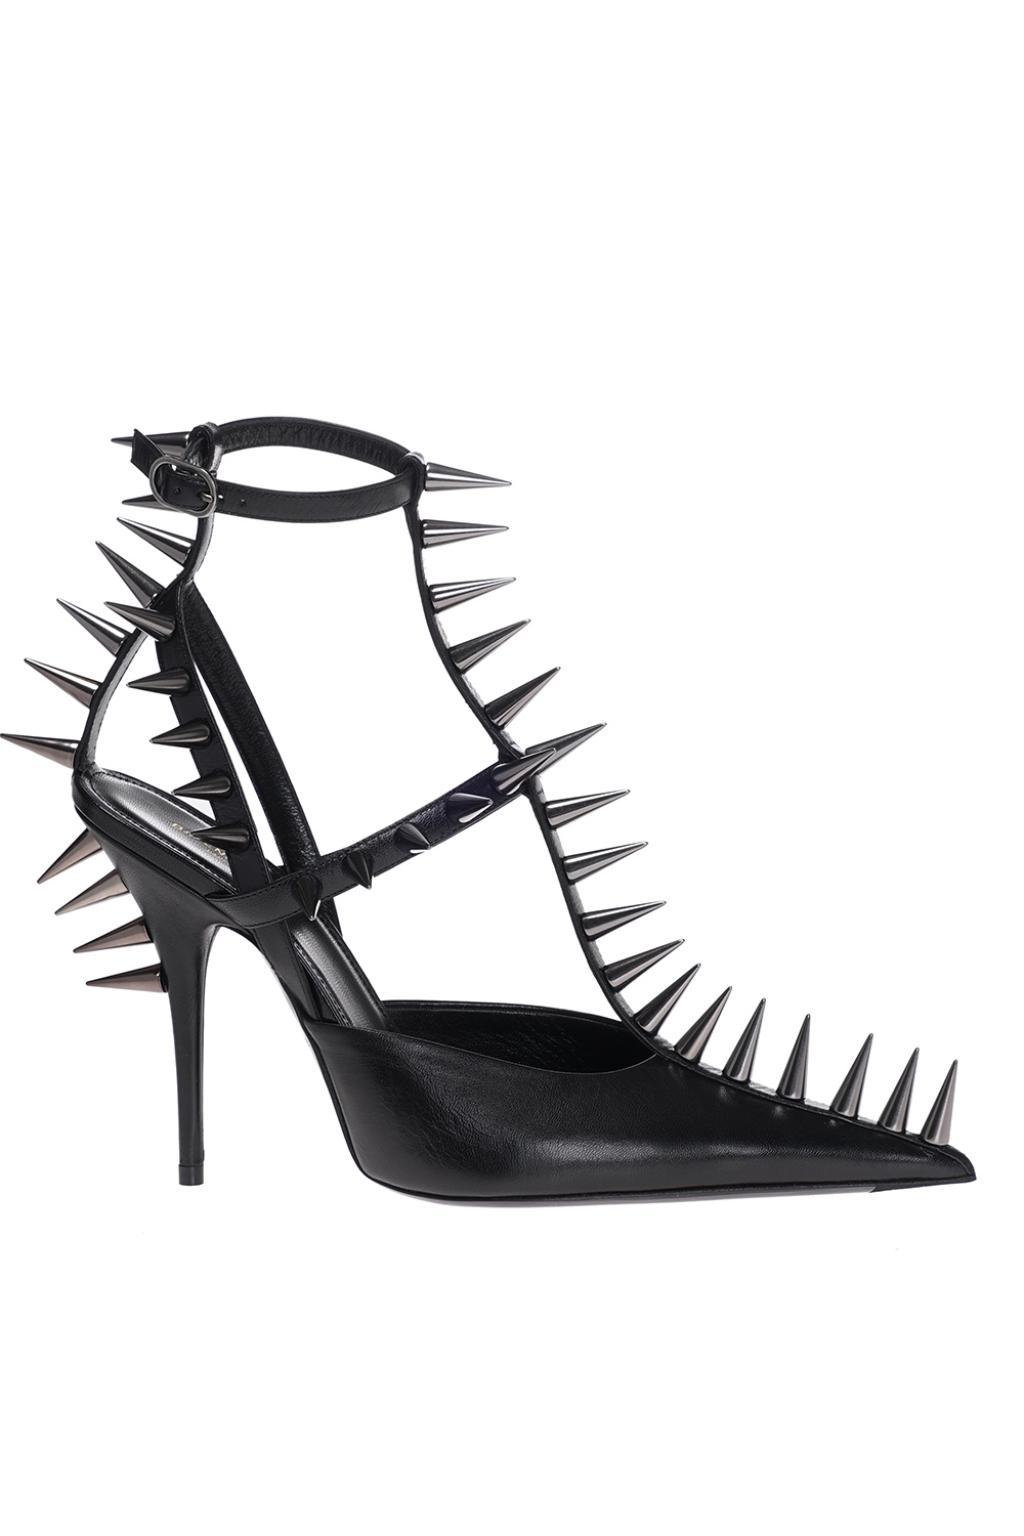 Balenciaga Black Knife 110 Spike Patent Leather Pumps - Lyst